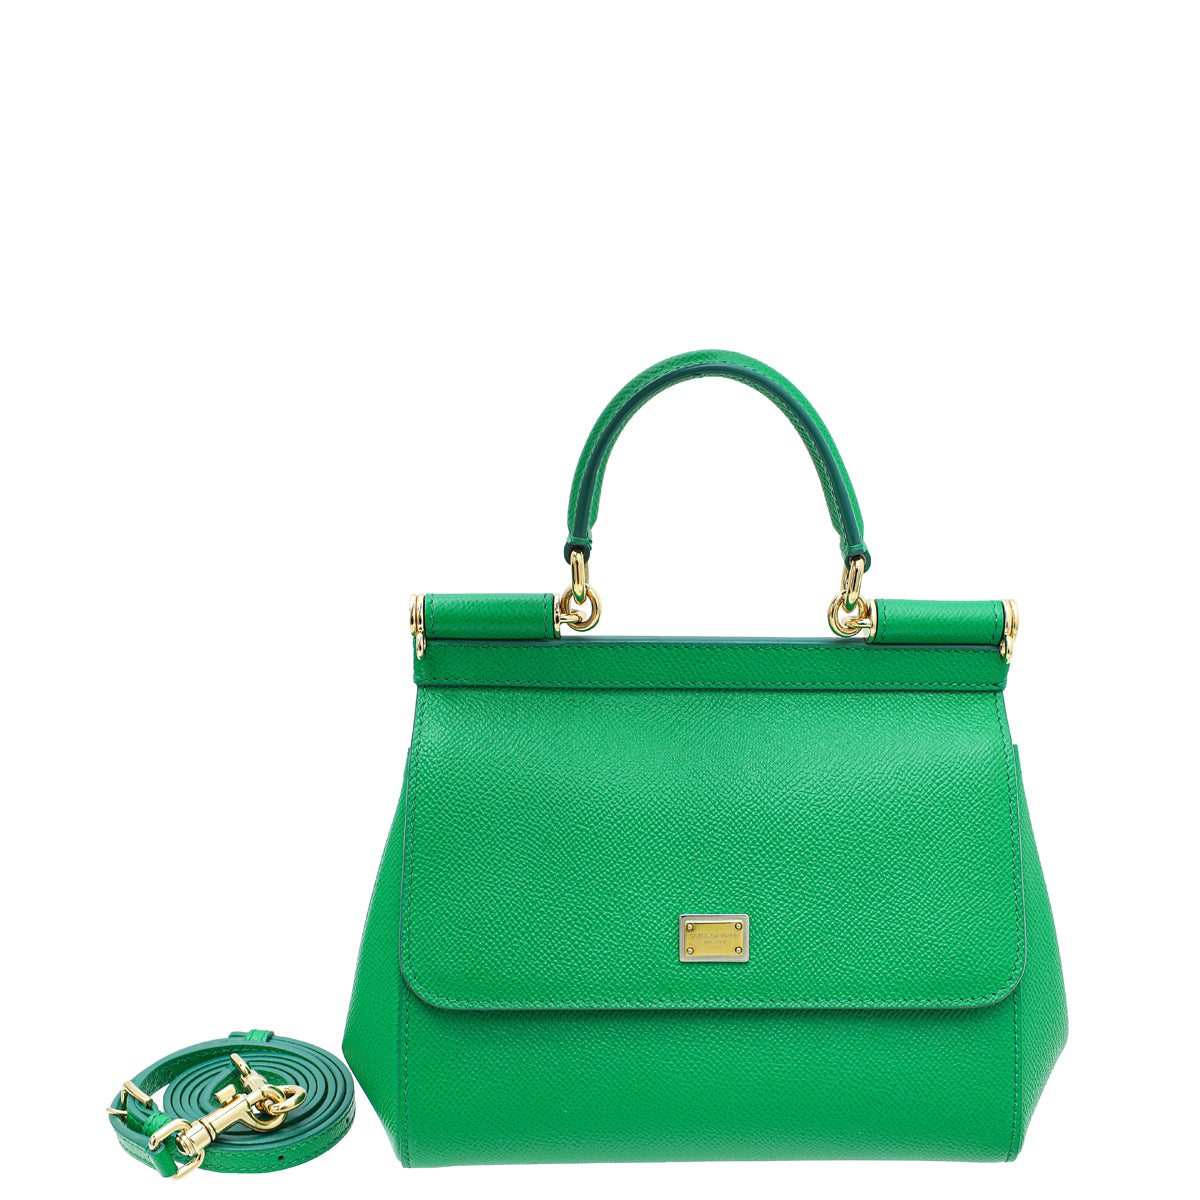 Dolce&Gabbana Small Sicily Bag Dauphine Leather Green, Satchel